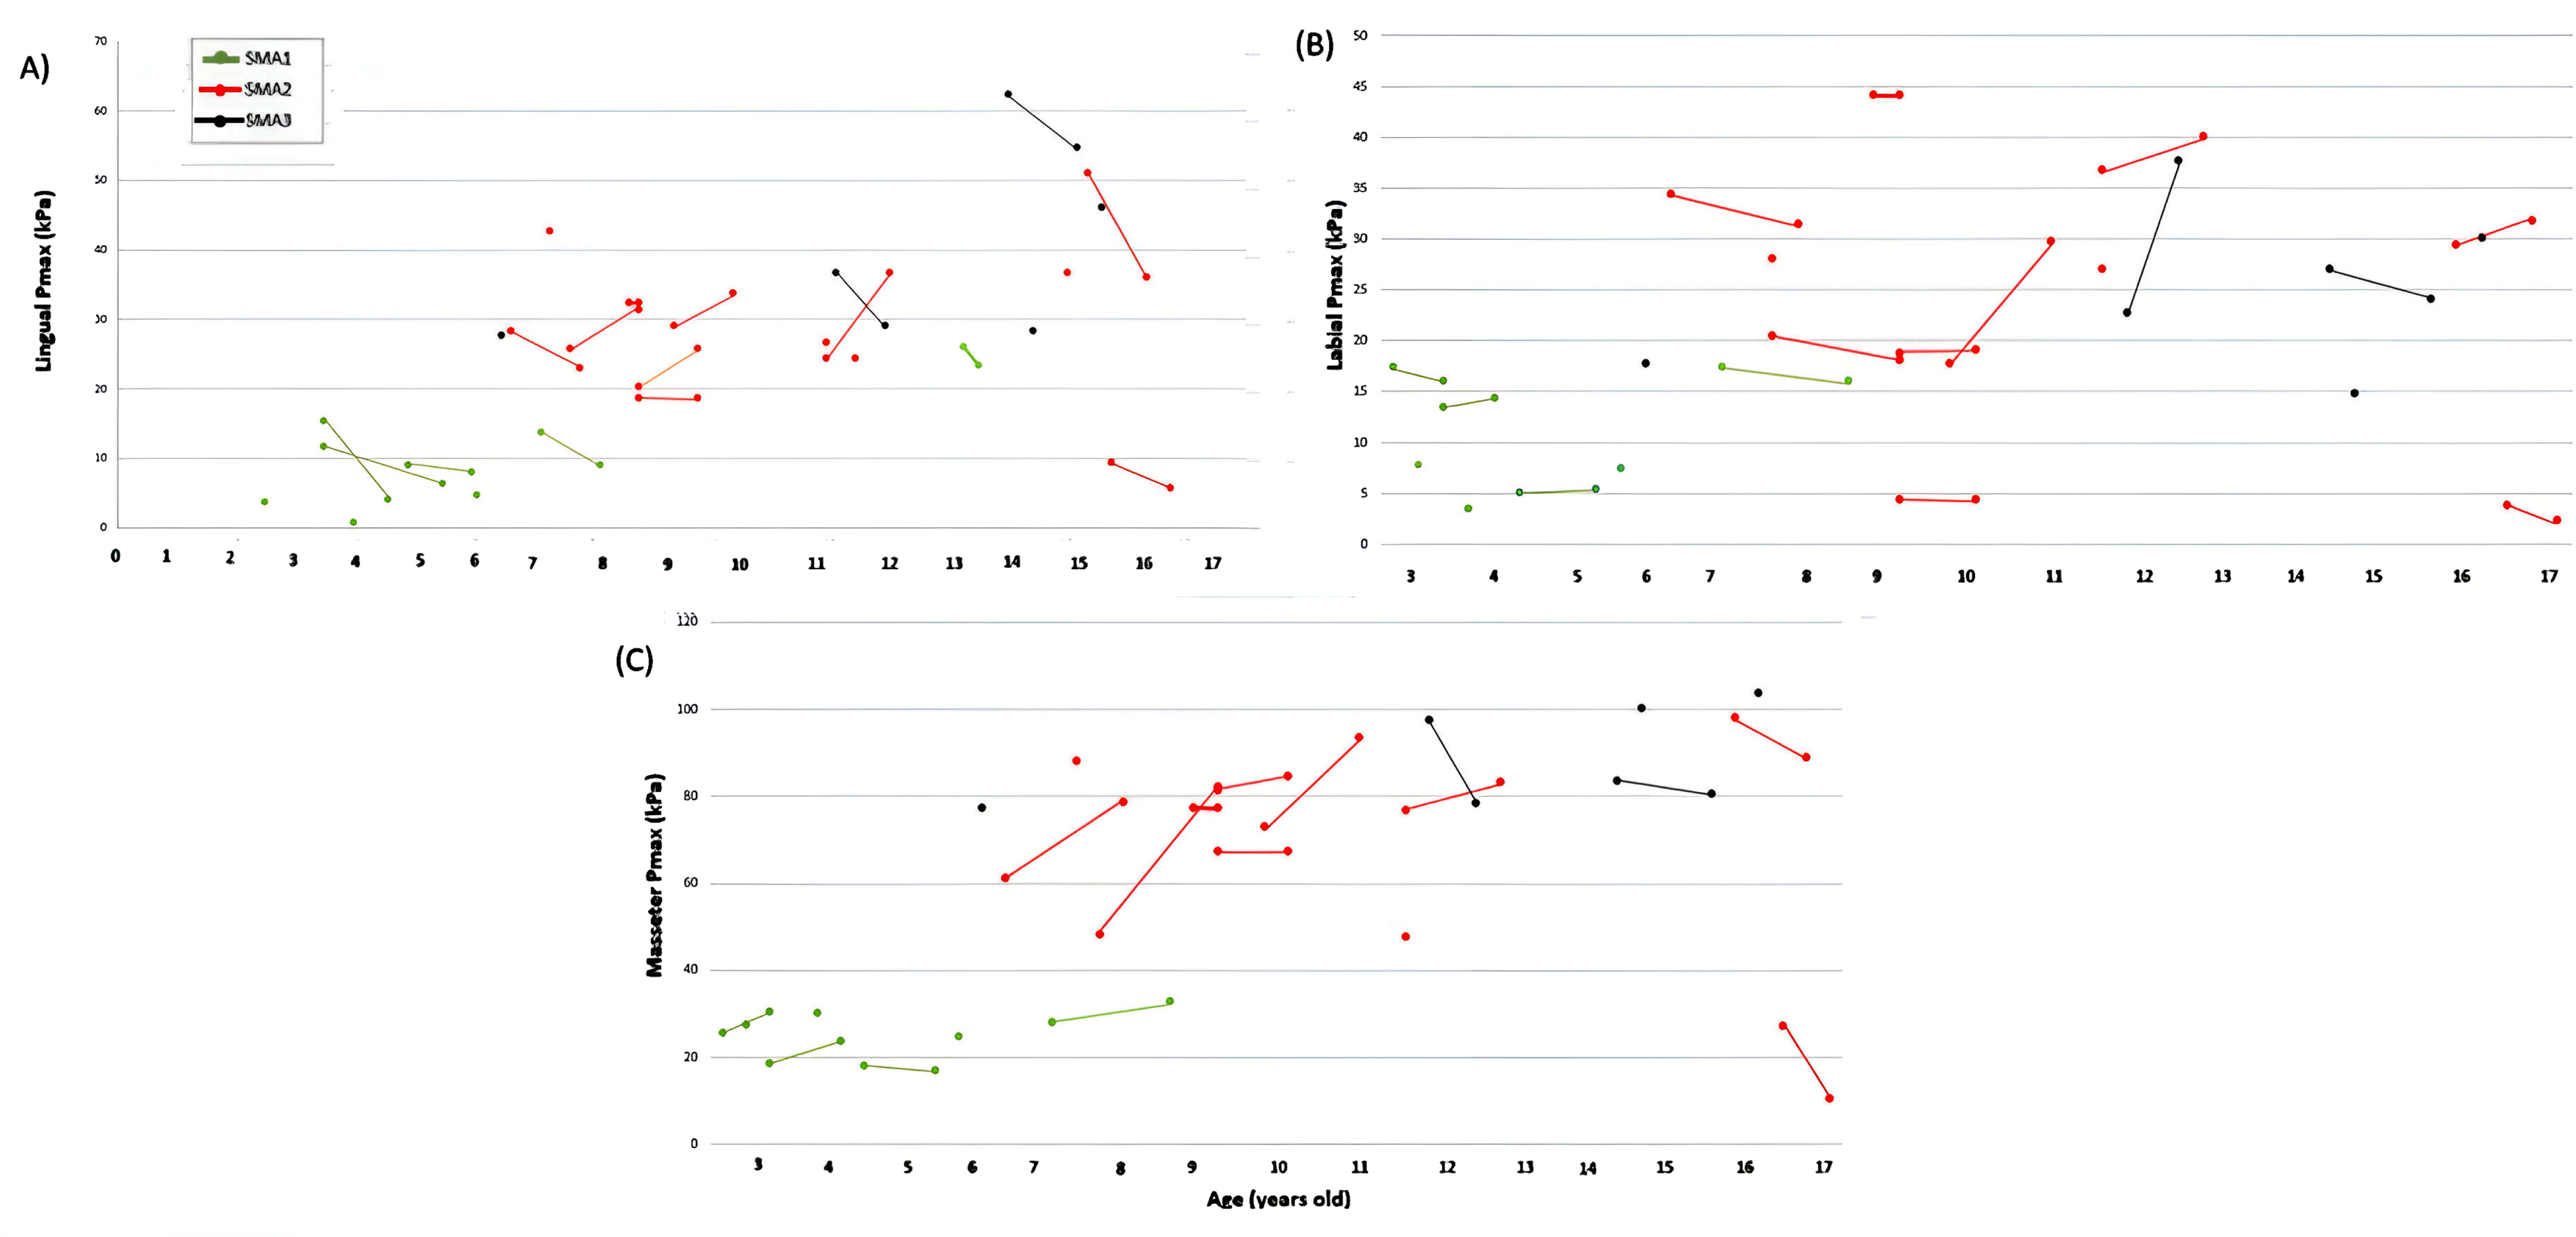 Evolution of individual lingual (A), labial (B), and masseter (C) Pmax values at a 1-year interval according to SMA type (n = 17). SMA: spinal muscular atrophy.